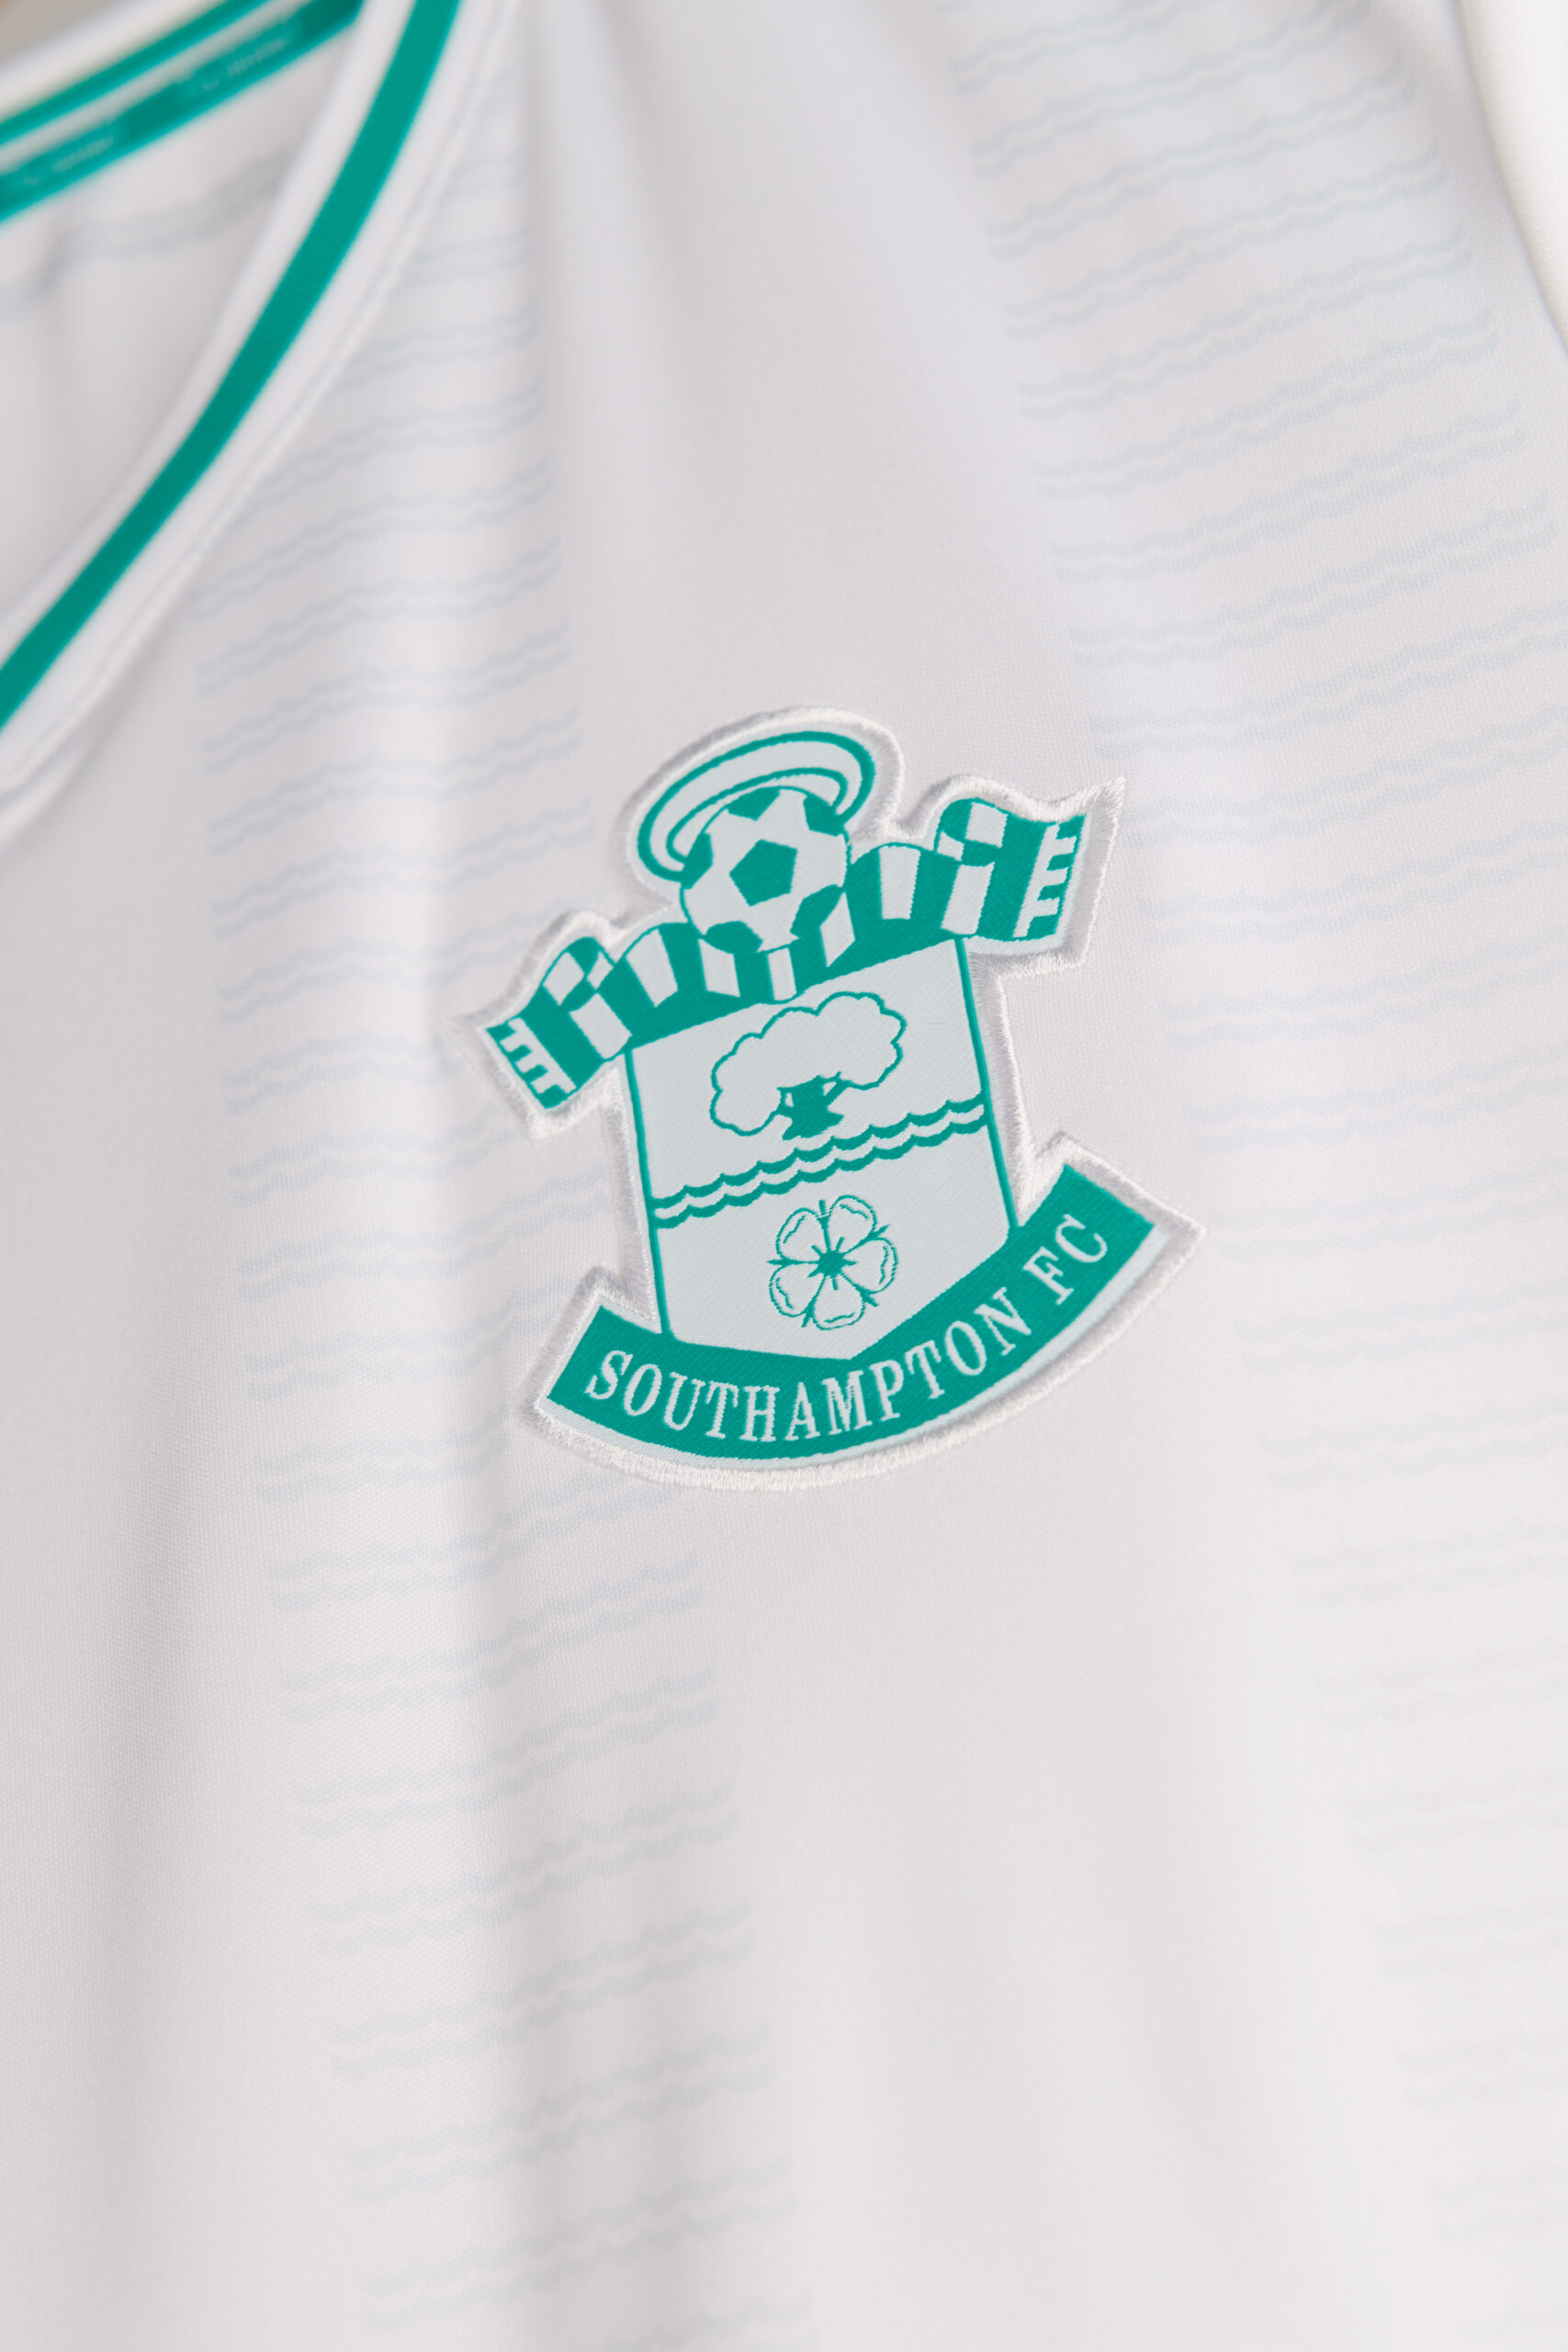 New Southampton FC Away Kit is Fresh and Clean (Photos)